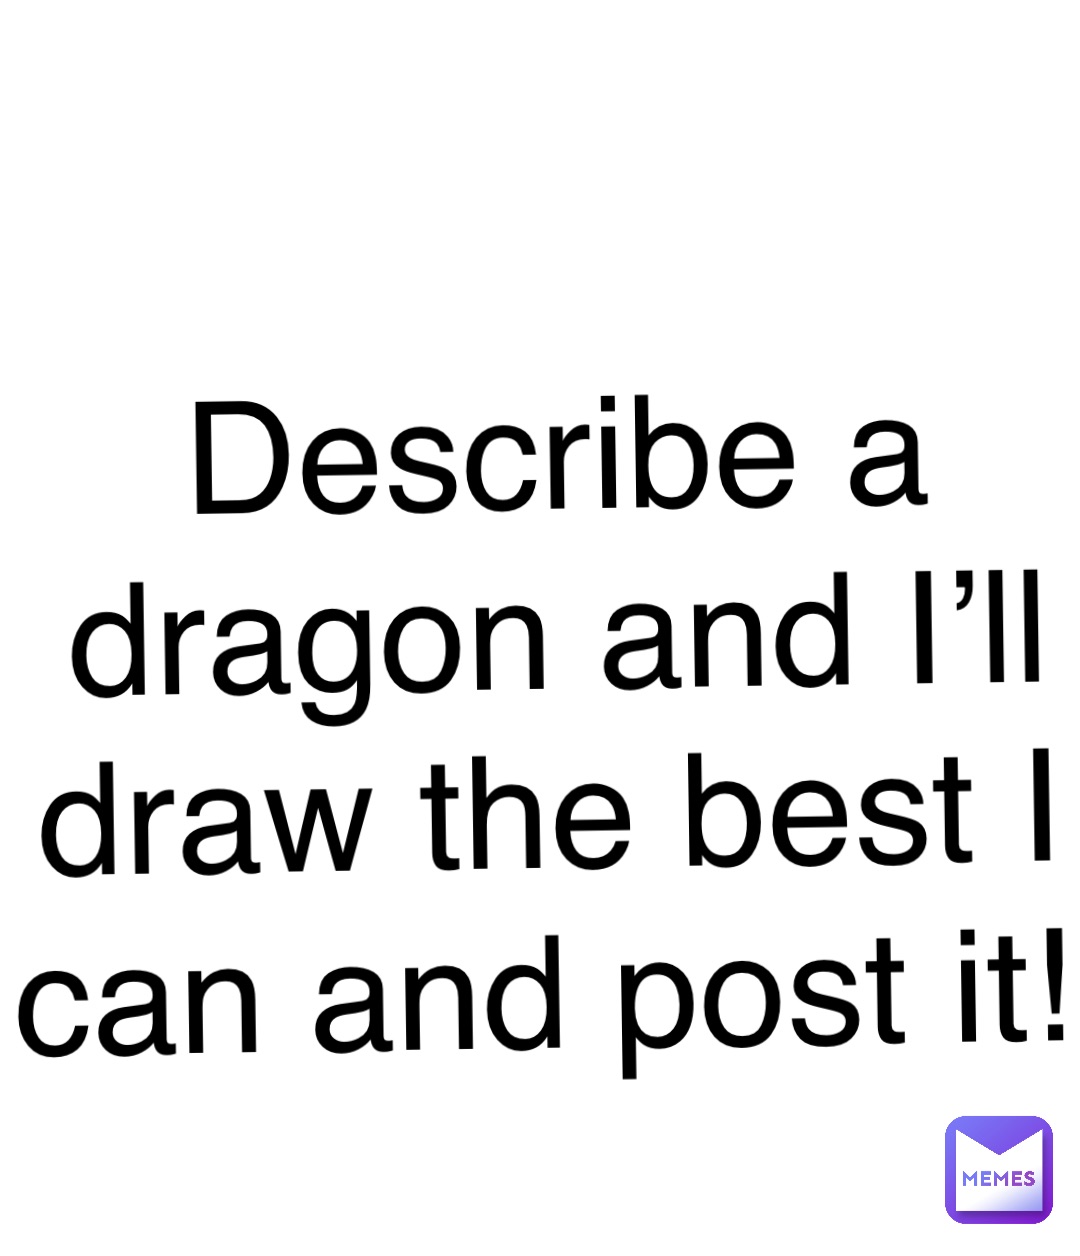 Double tap to edit Describe a dragon and I’ll draw the best I can and post it!